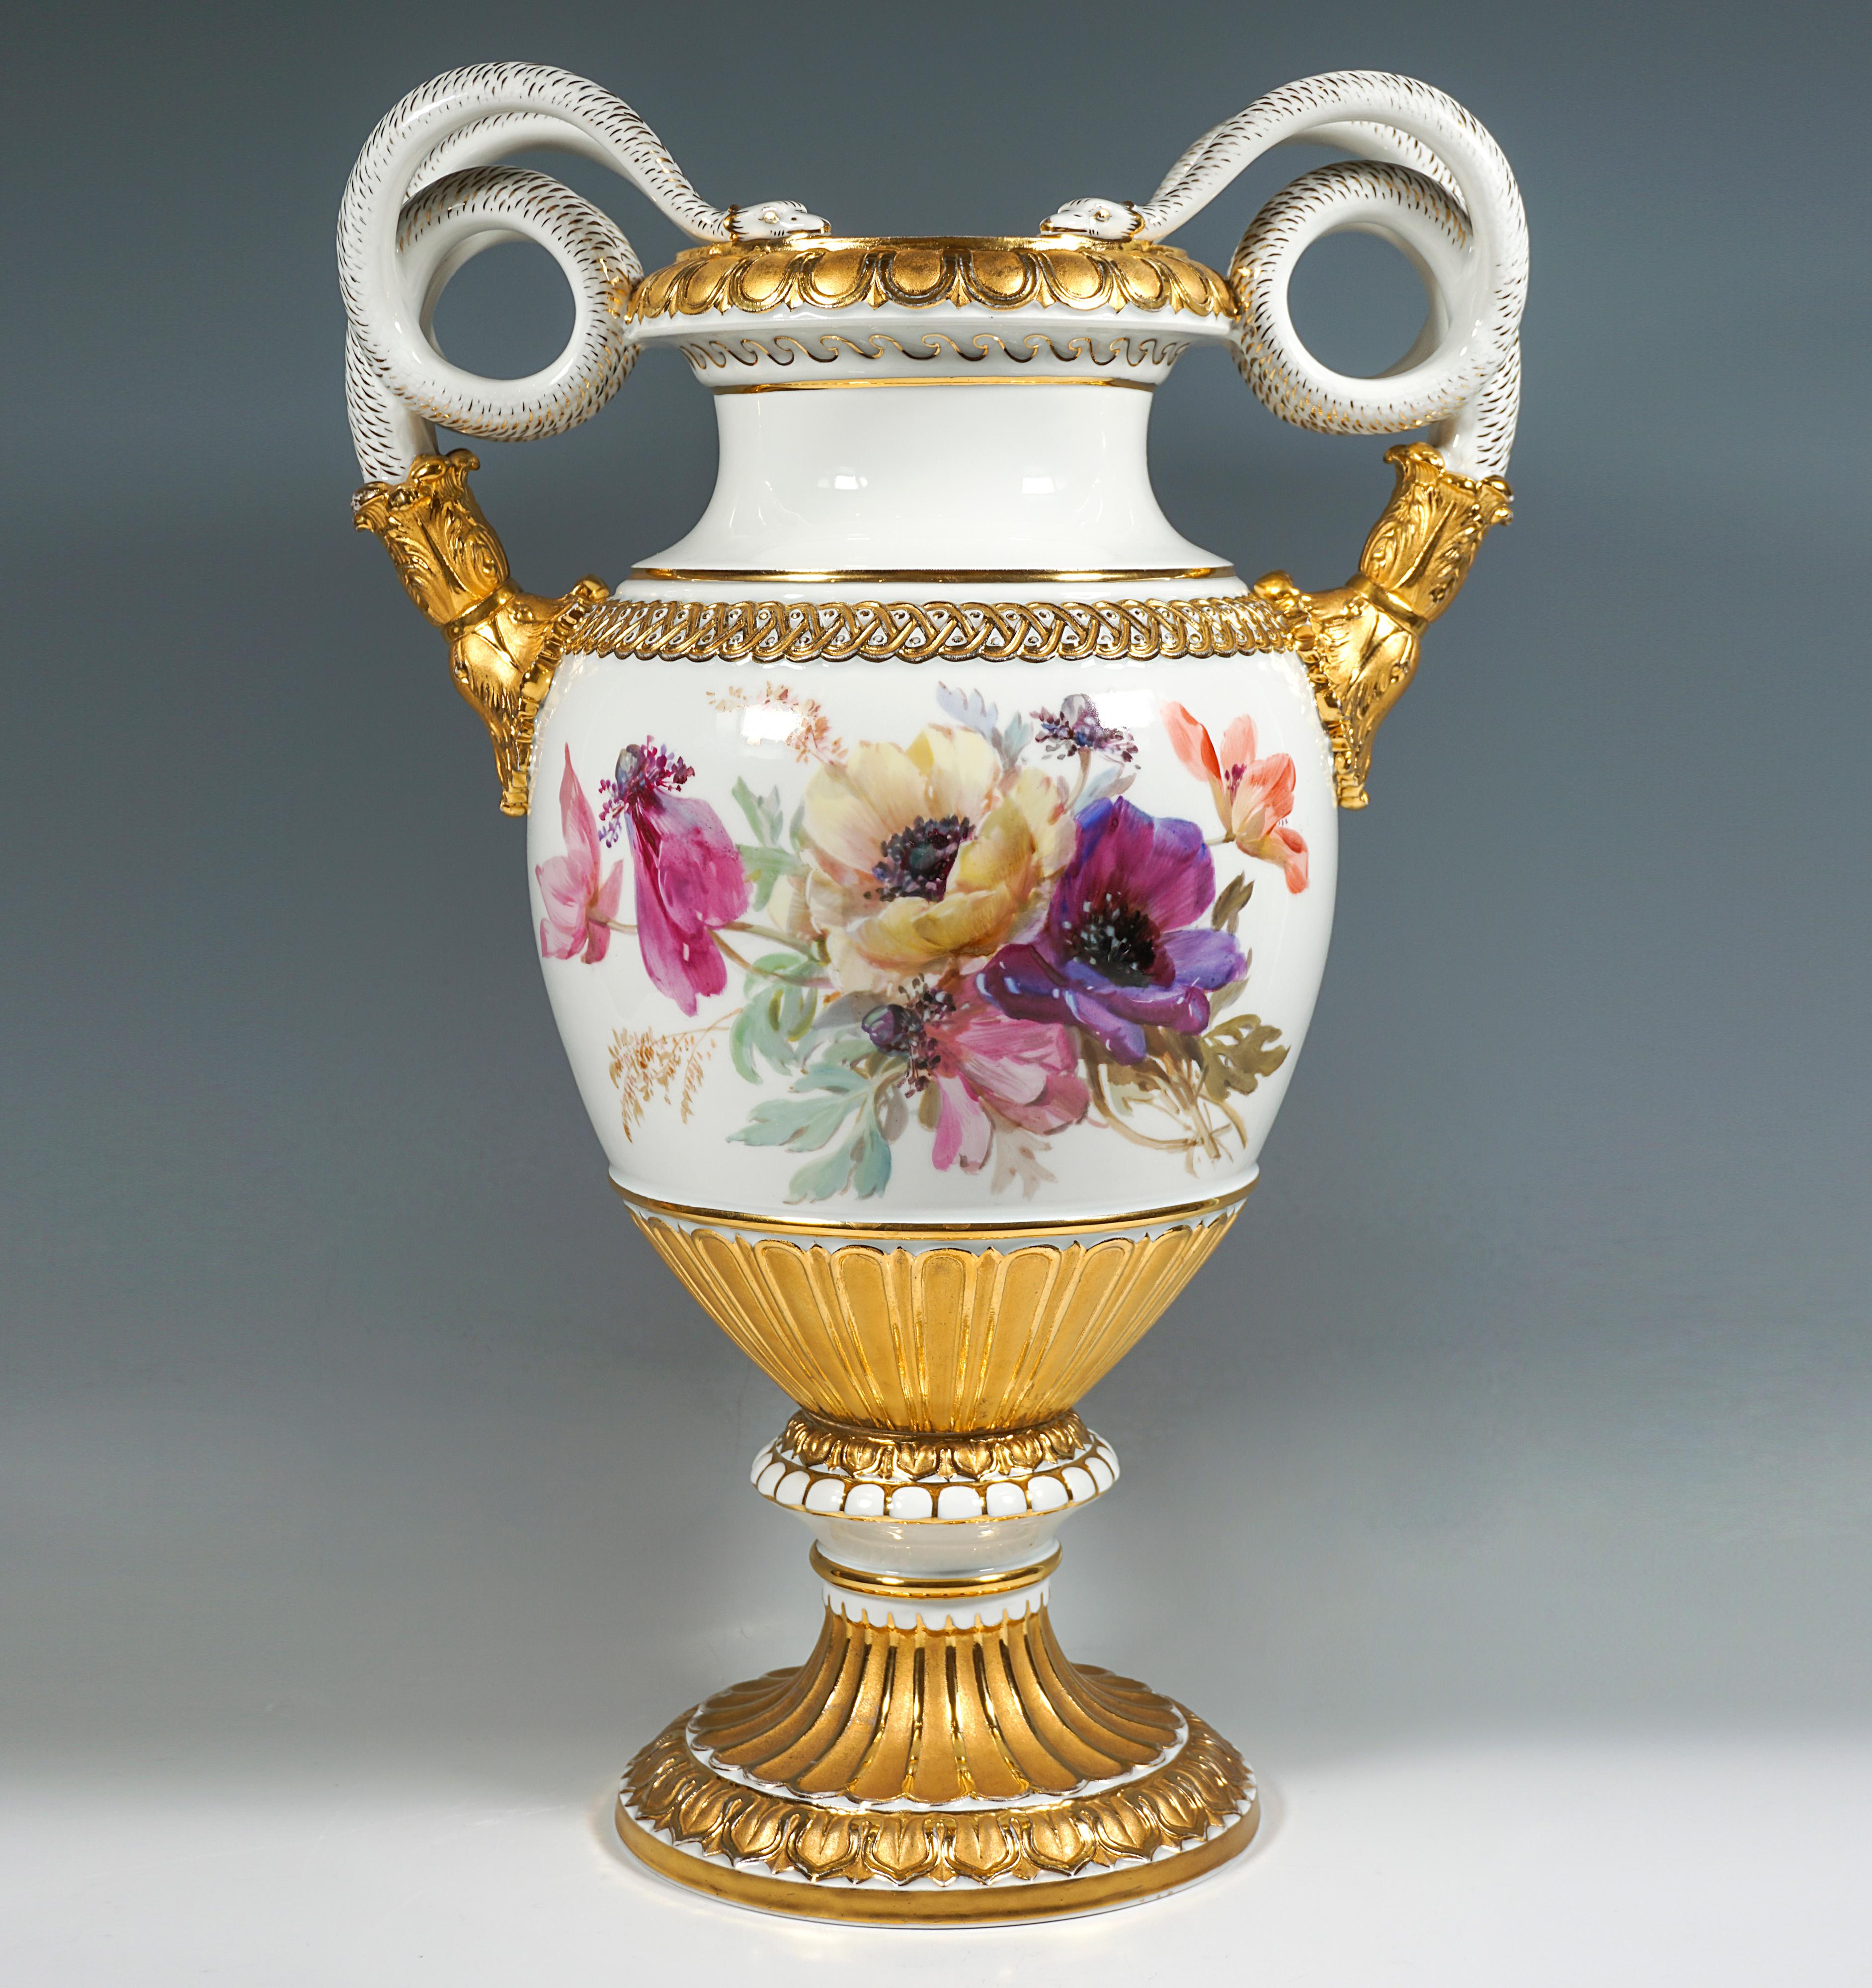 Very large double snake-handled vase in baluster form on a mounted funnel-shaped base, the handles raised at the sides in the form of coiled pairs of snakes, white ground, the front and back finely painted in soft polychrome with pink rhododendron